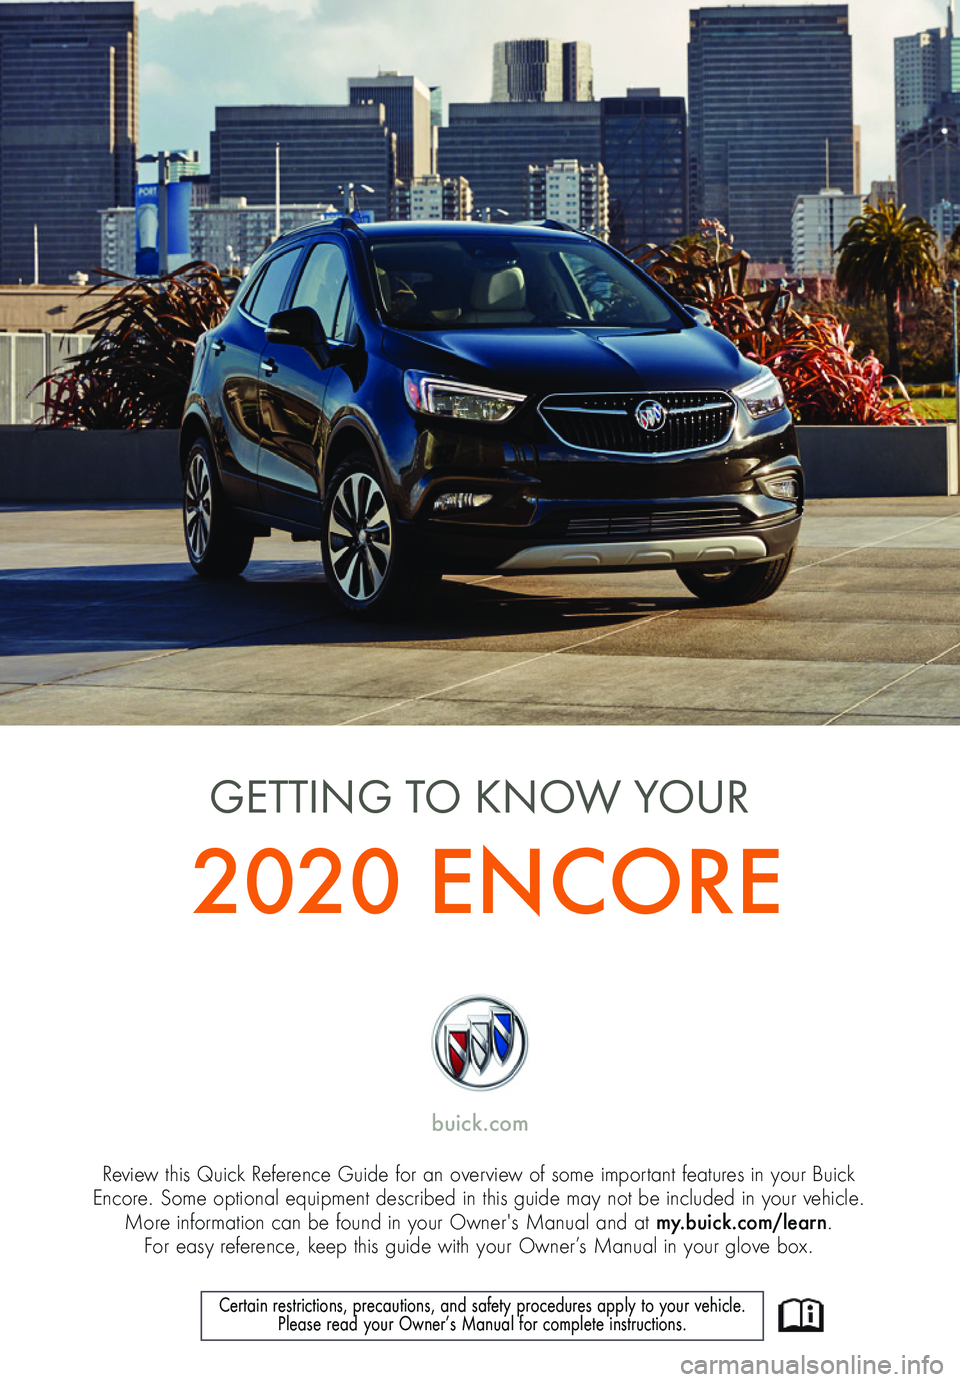 BUICK ENCORE GX 2020  Get To Know Guide 1
Review this Quick Reference Guide for an overview of some important features in your Buick  Encore. Some optional equipment described in this guide may not be included in your vehicle.  More informa